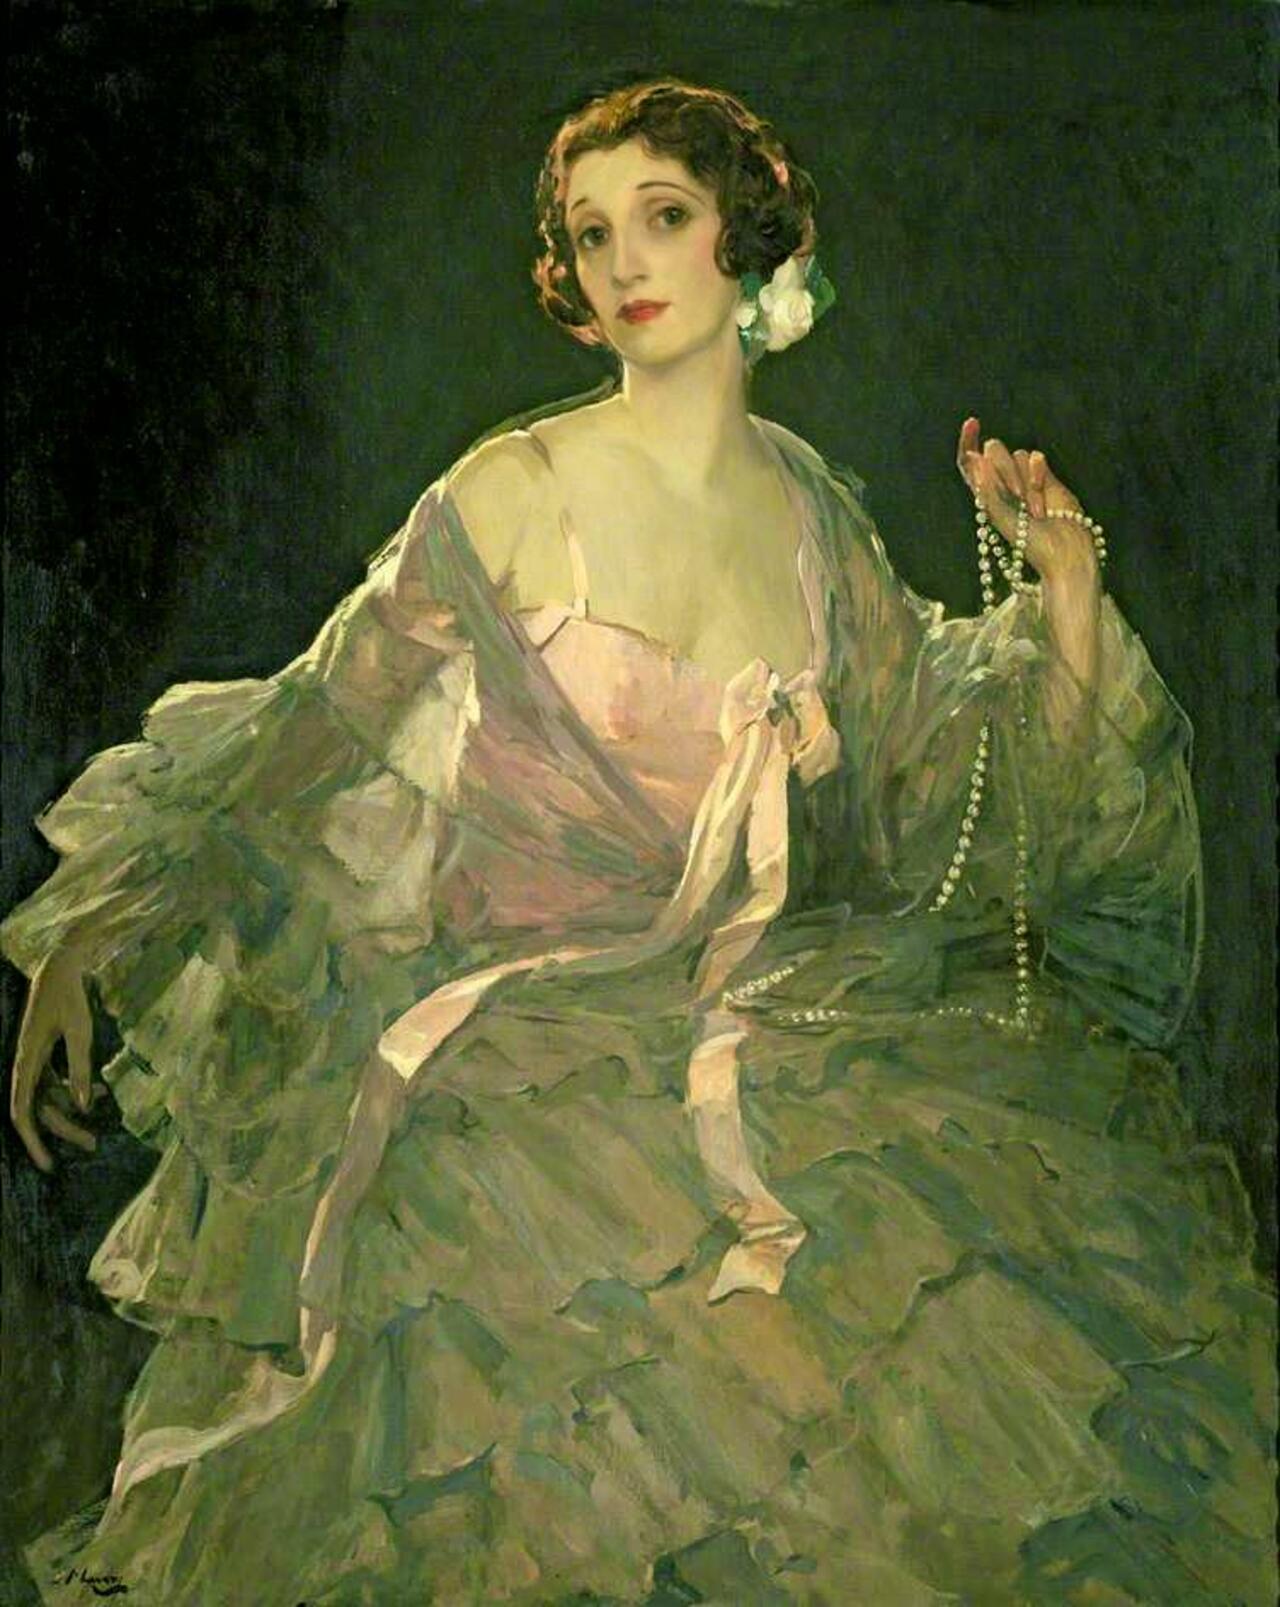 RT @yebosfaye: Greetings All♥
<Sir John Lavery
‘Lady Lavery
Hazel in Rose and Grey’ 1922 http://t.co/vKhTBUJgFZ